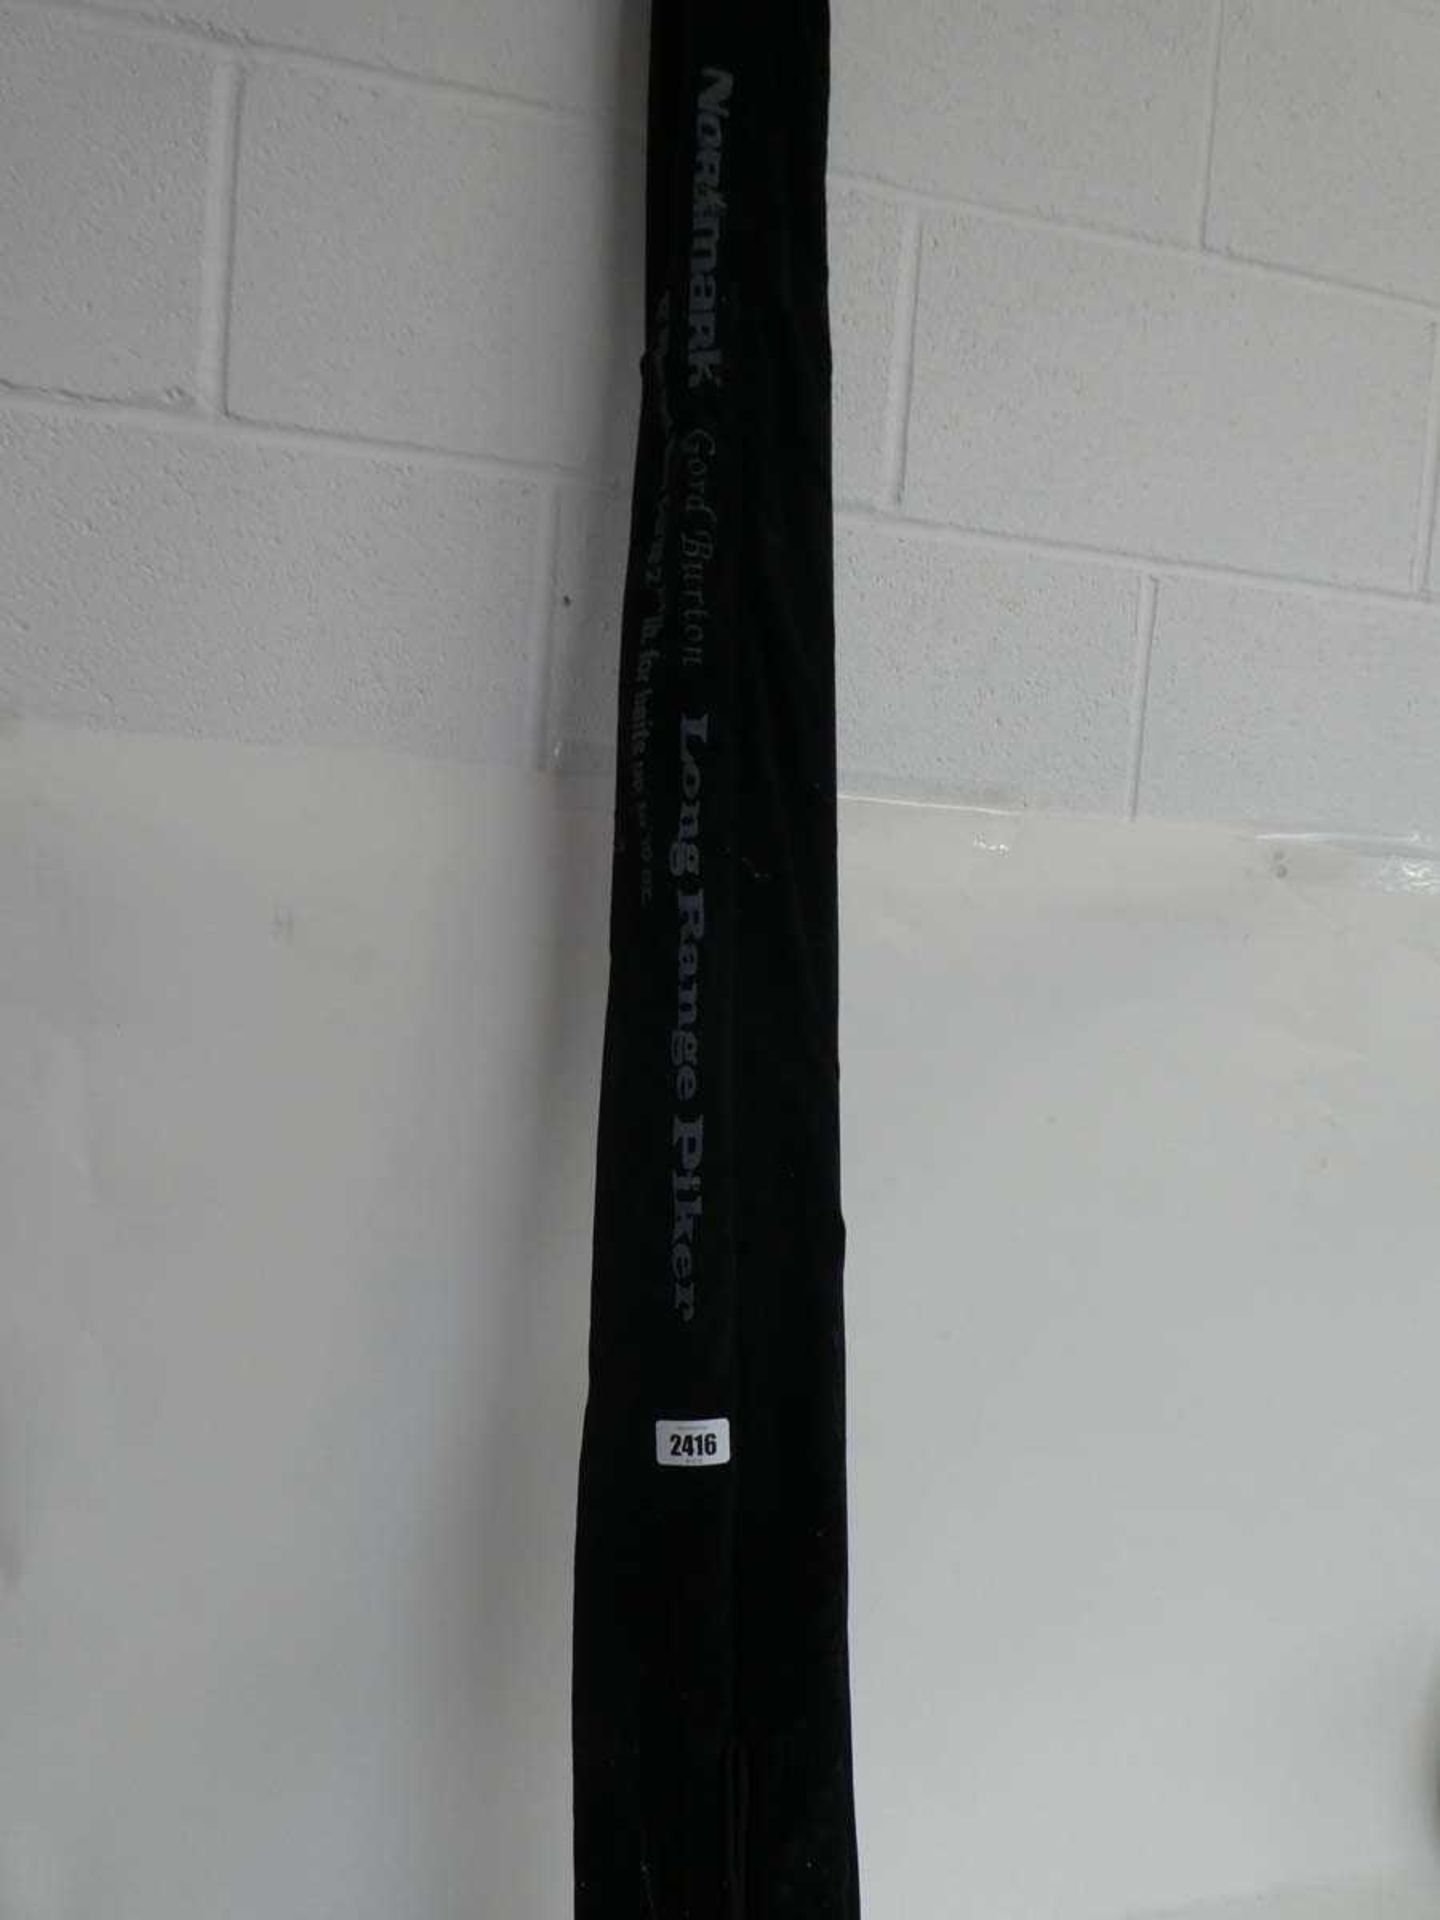 Normark 3 piece long range piker rod (12', 2 3/4lb test curve for baits up to 10z)